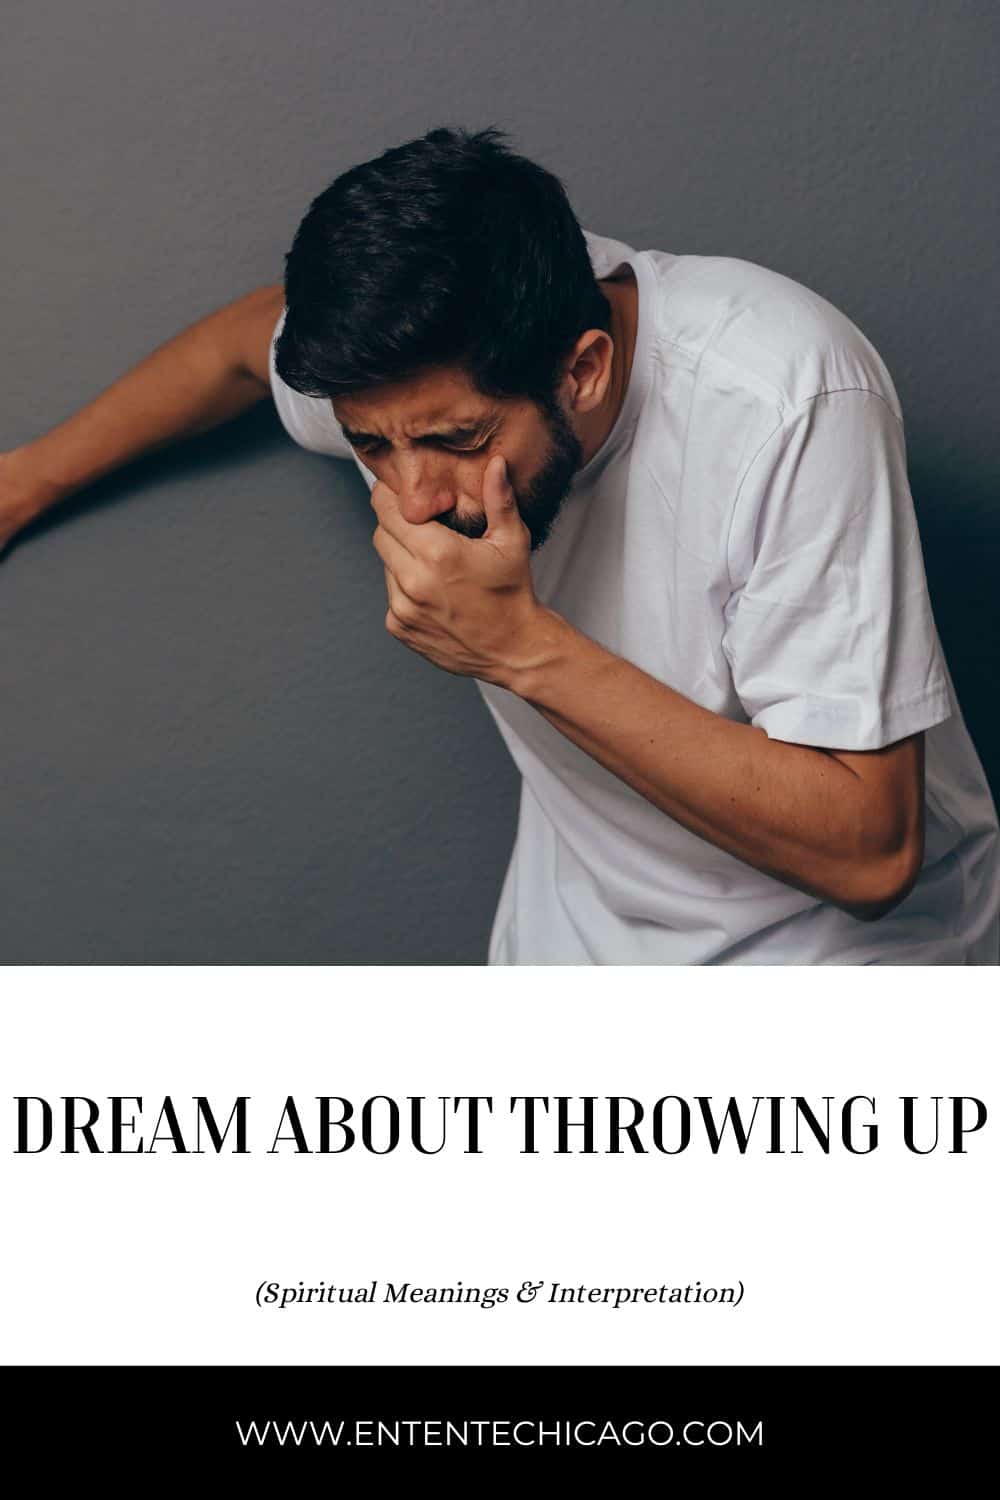 Context of Dreams About Throwing Up